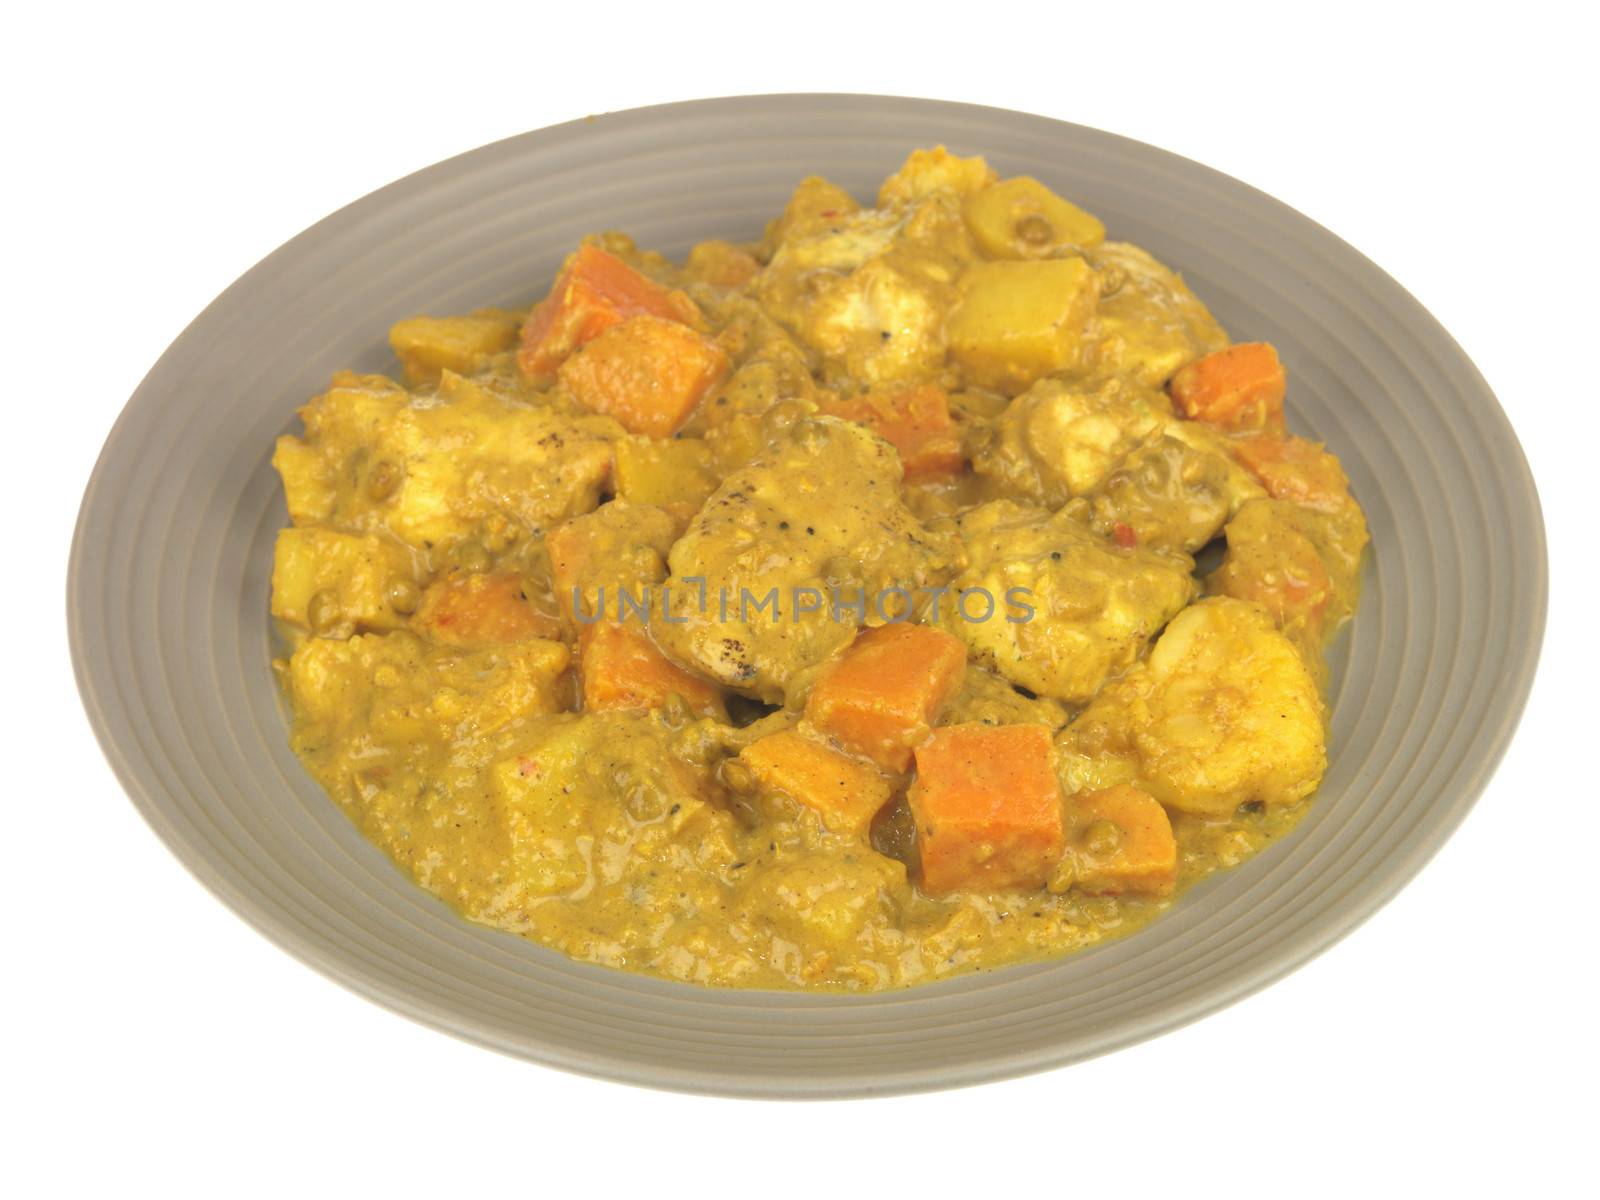 Chicken Curry by Whiteboxmedia